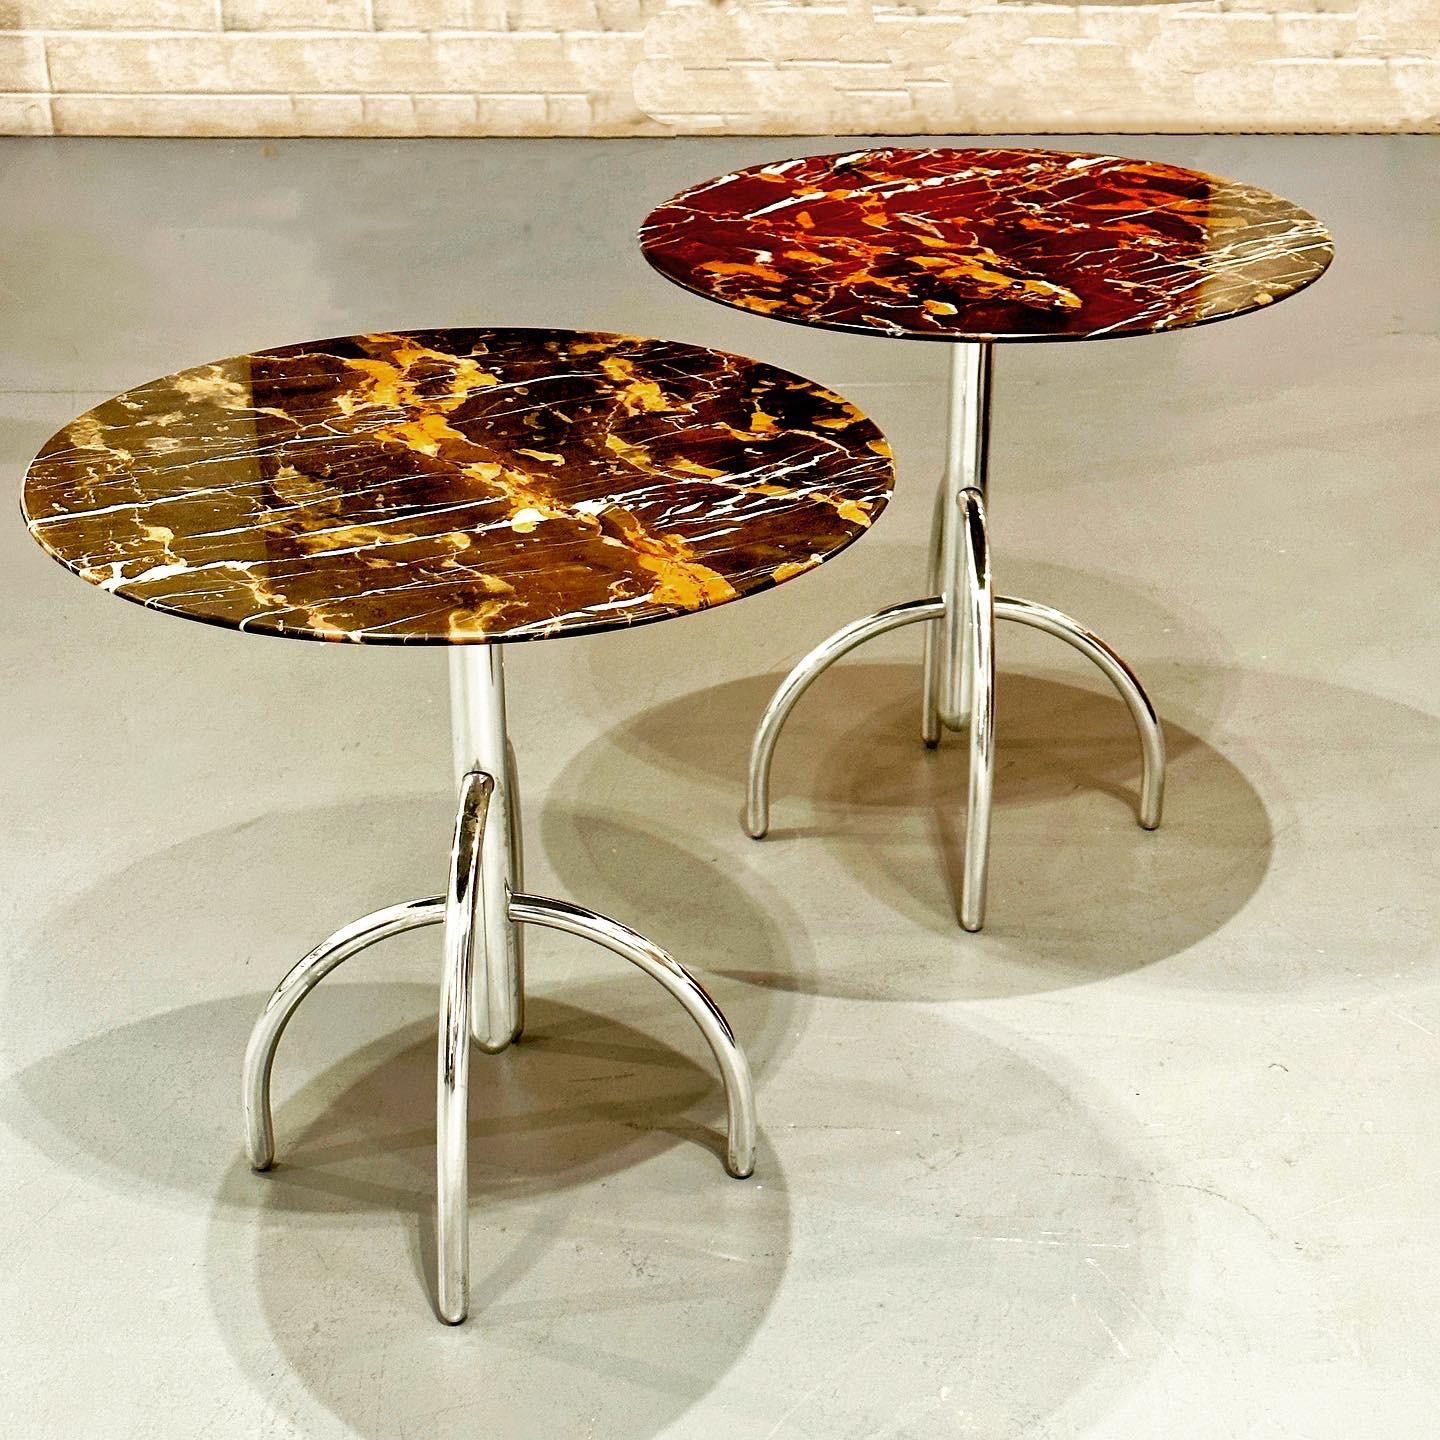 Lawrence Laske for Knoll Pair Saguaro Cactus Marble and Polished Aluminum Side Tables, ca 1993

This stunning pair of side table featured a polished aluminum base and gorgeous tops made of Port Laurent marble. This marble has a deep brown \to almost